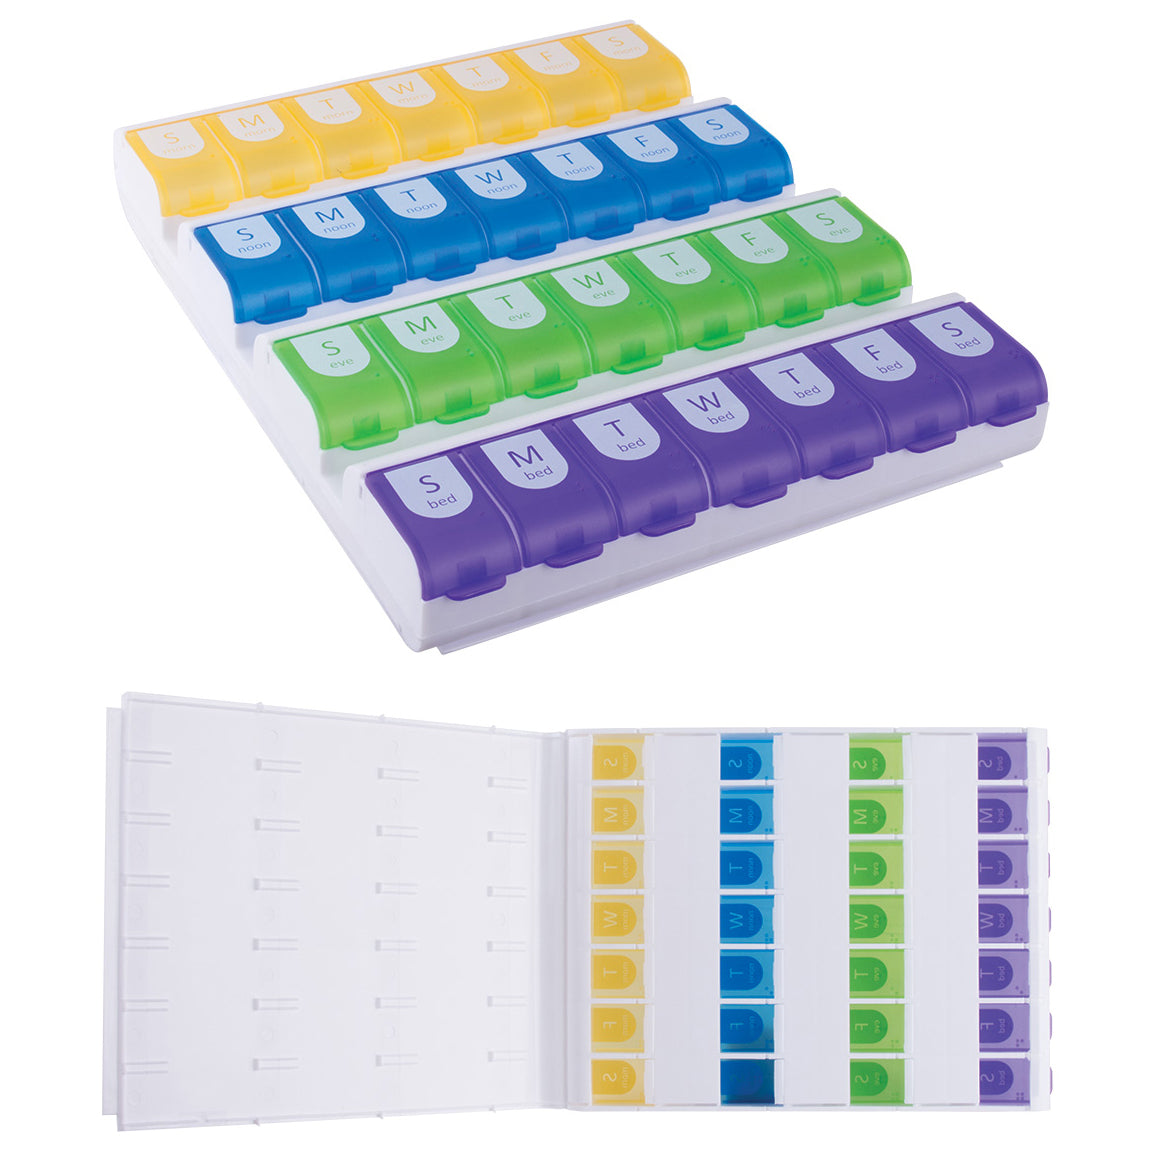 Easy Fill Weekly 4X a Day Medtime Pill Organizer